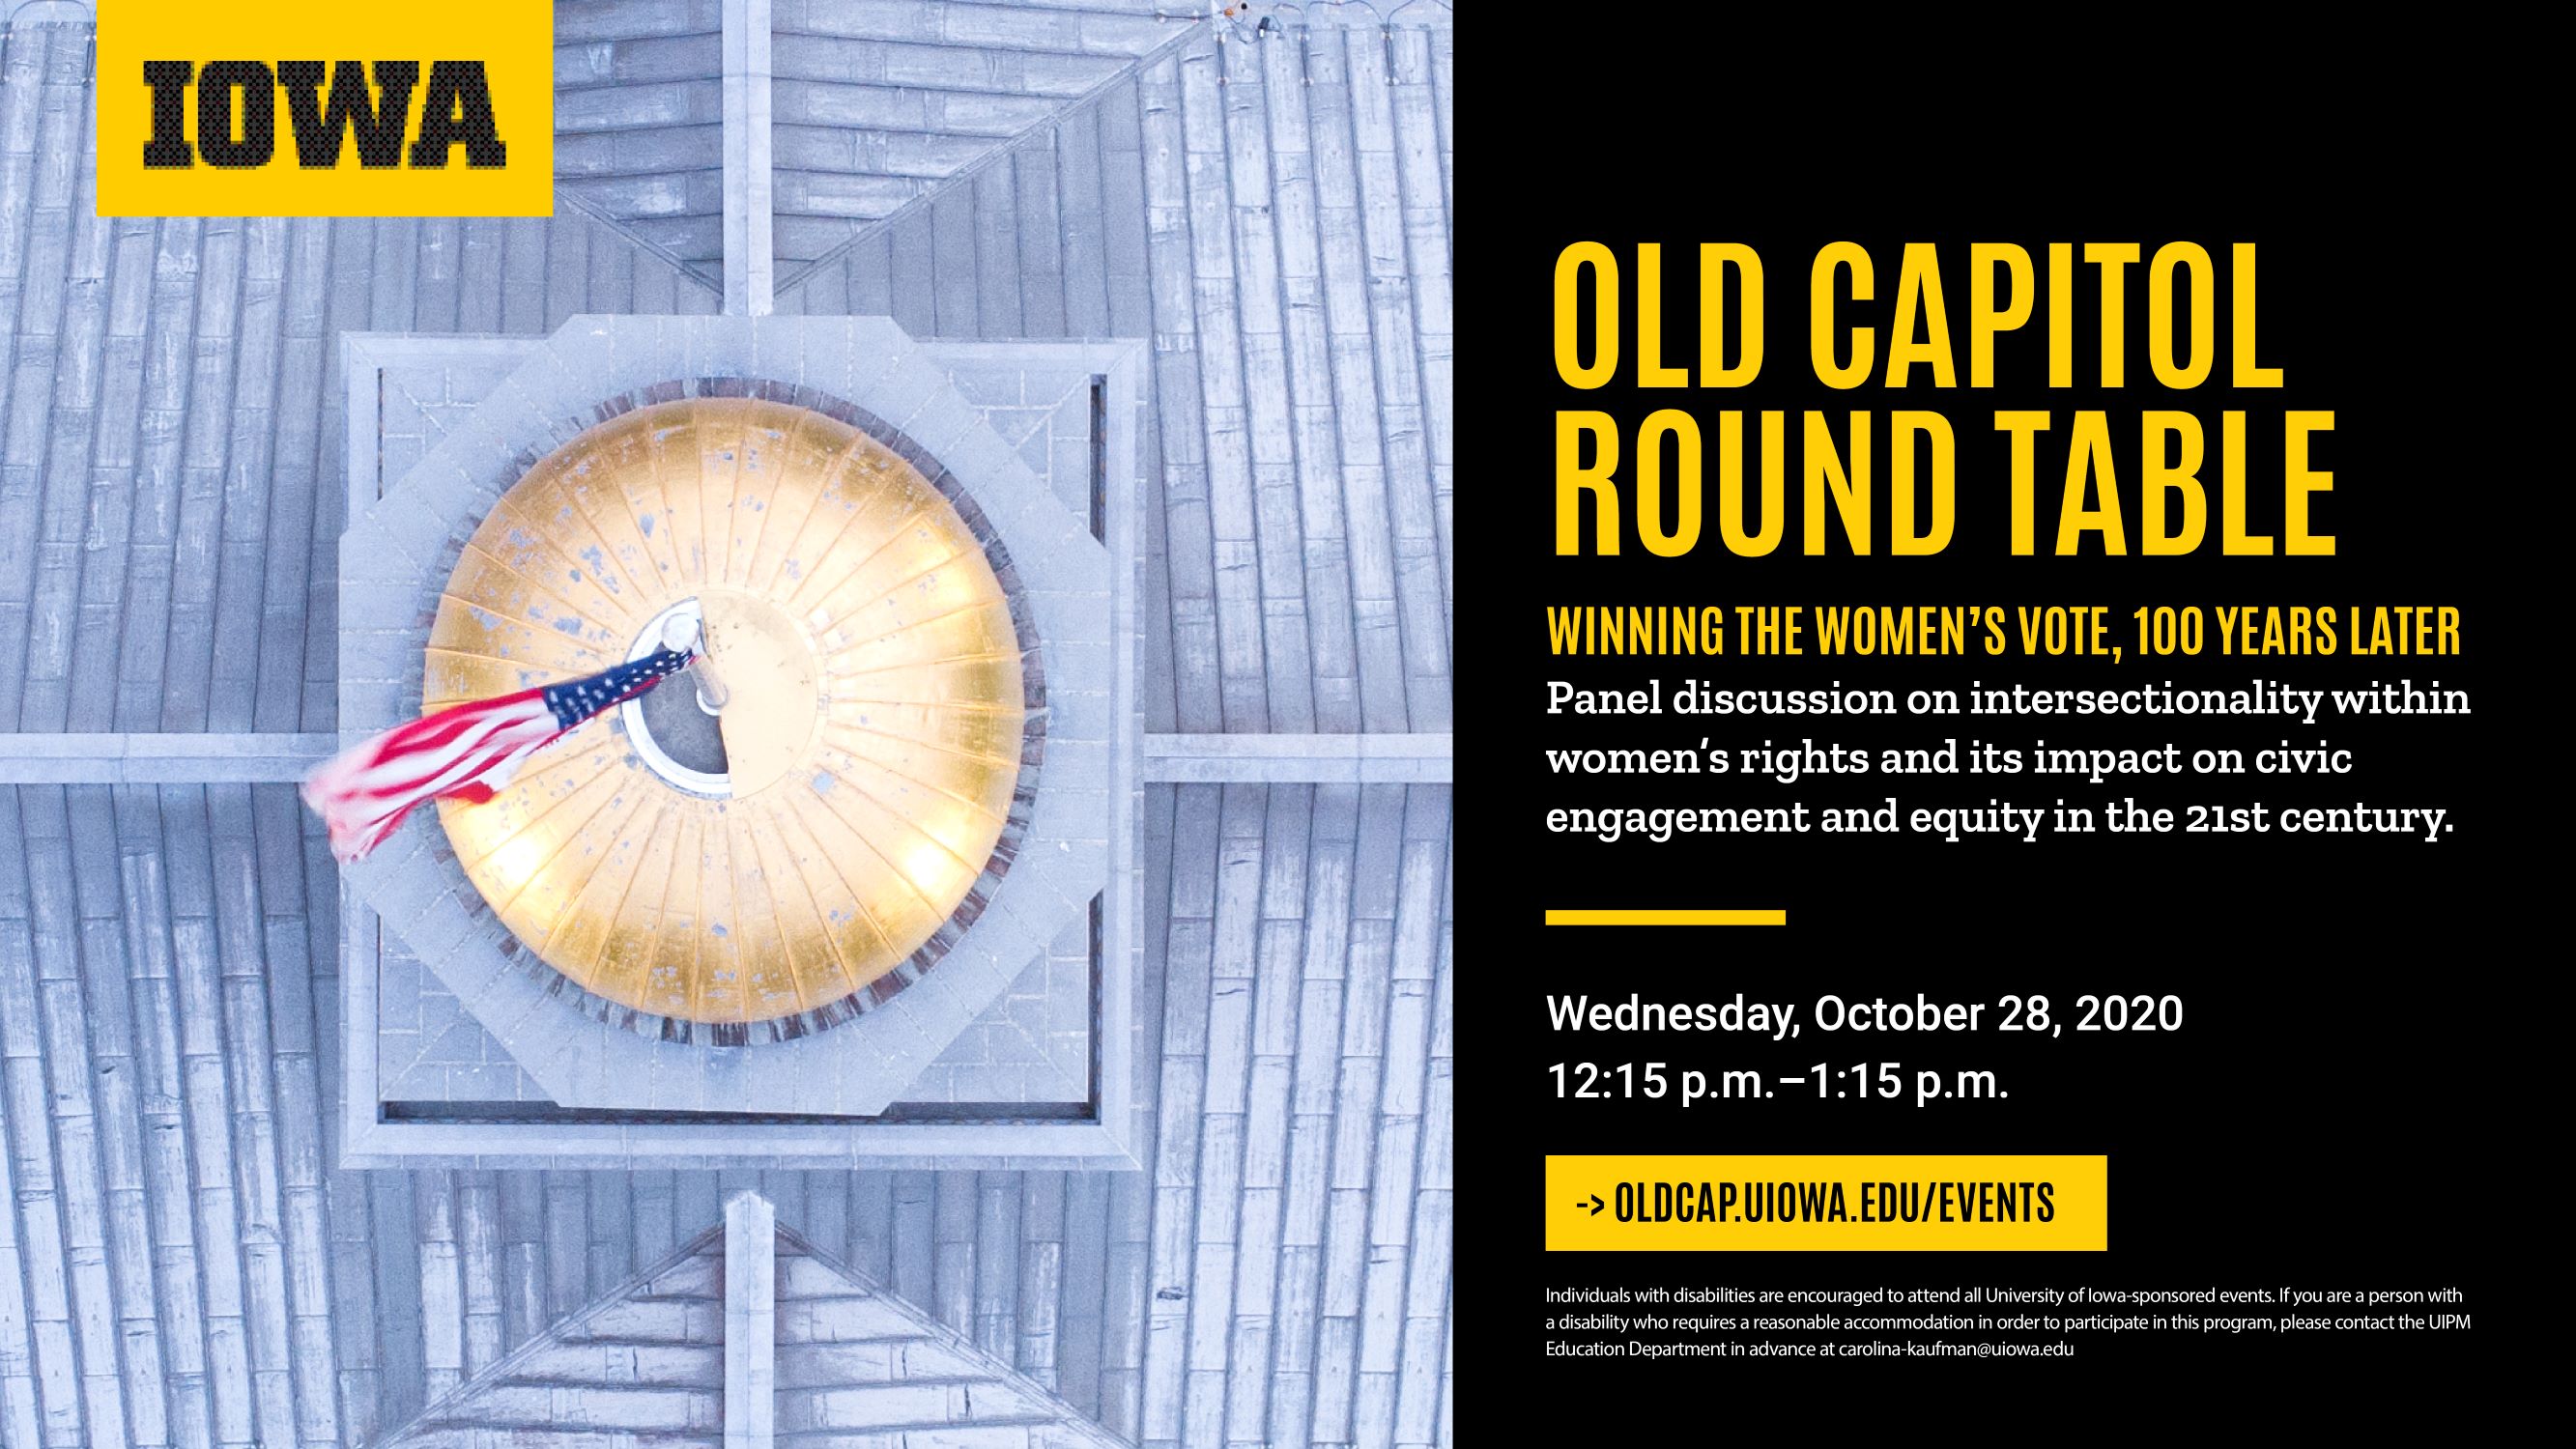 Old Capitol Round Table event